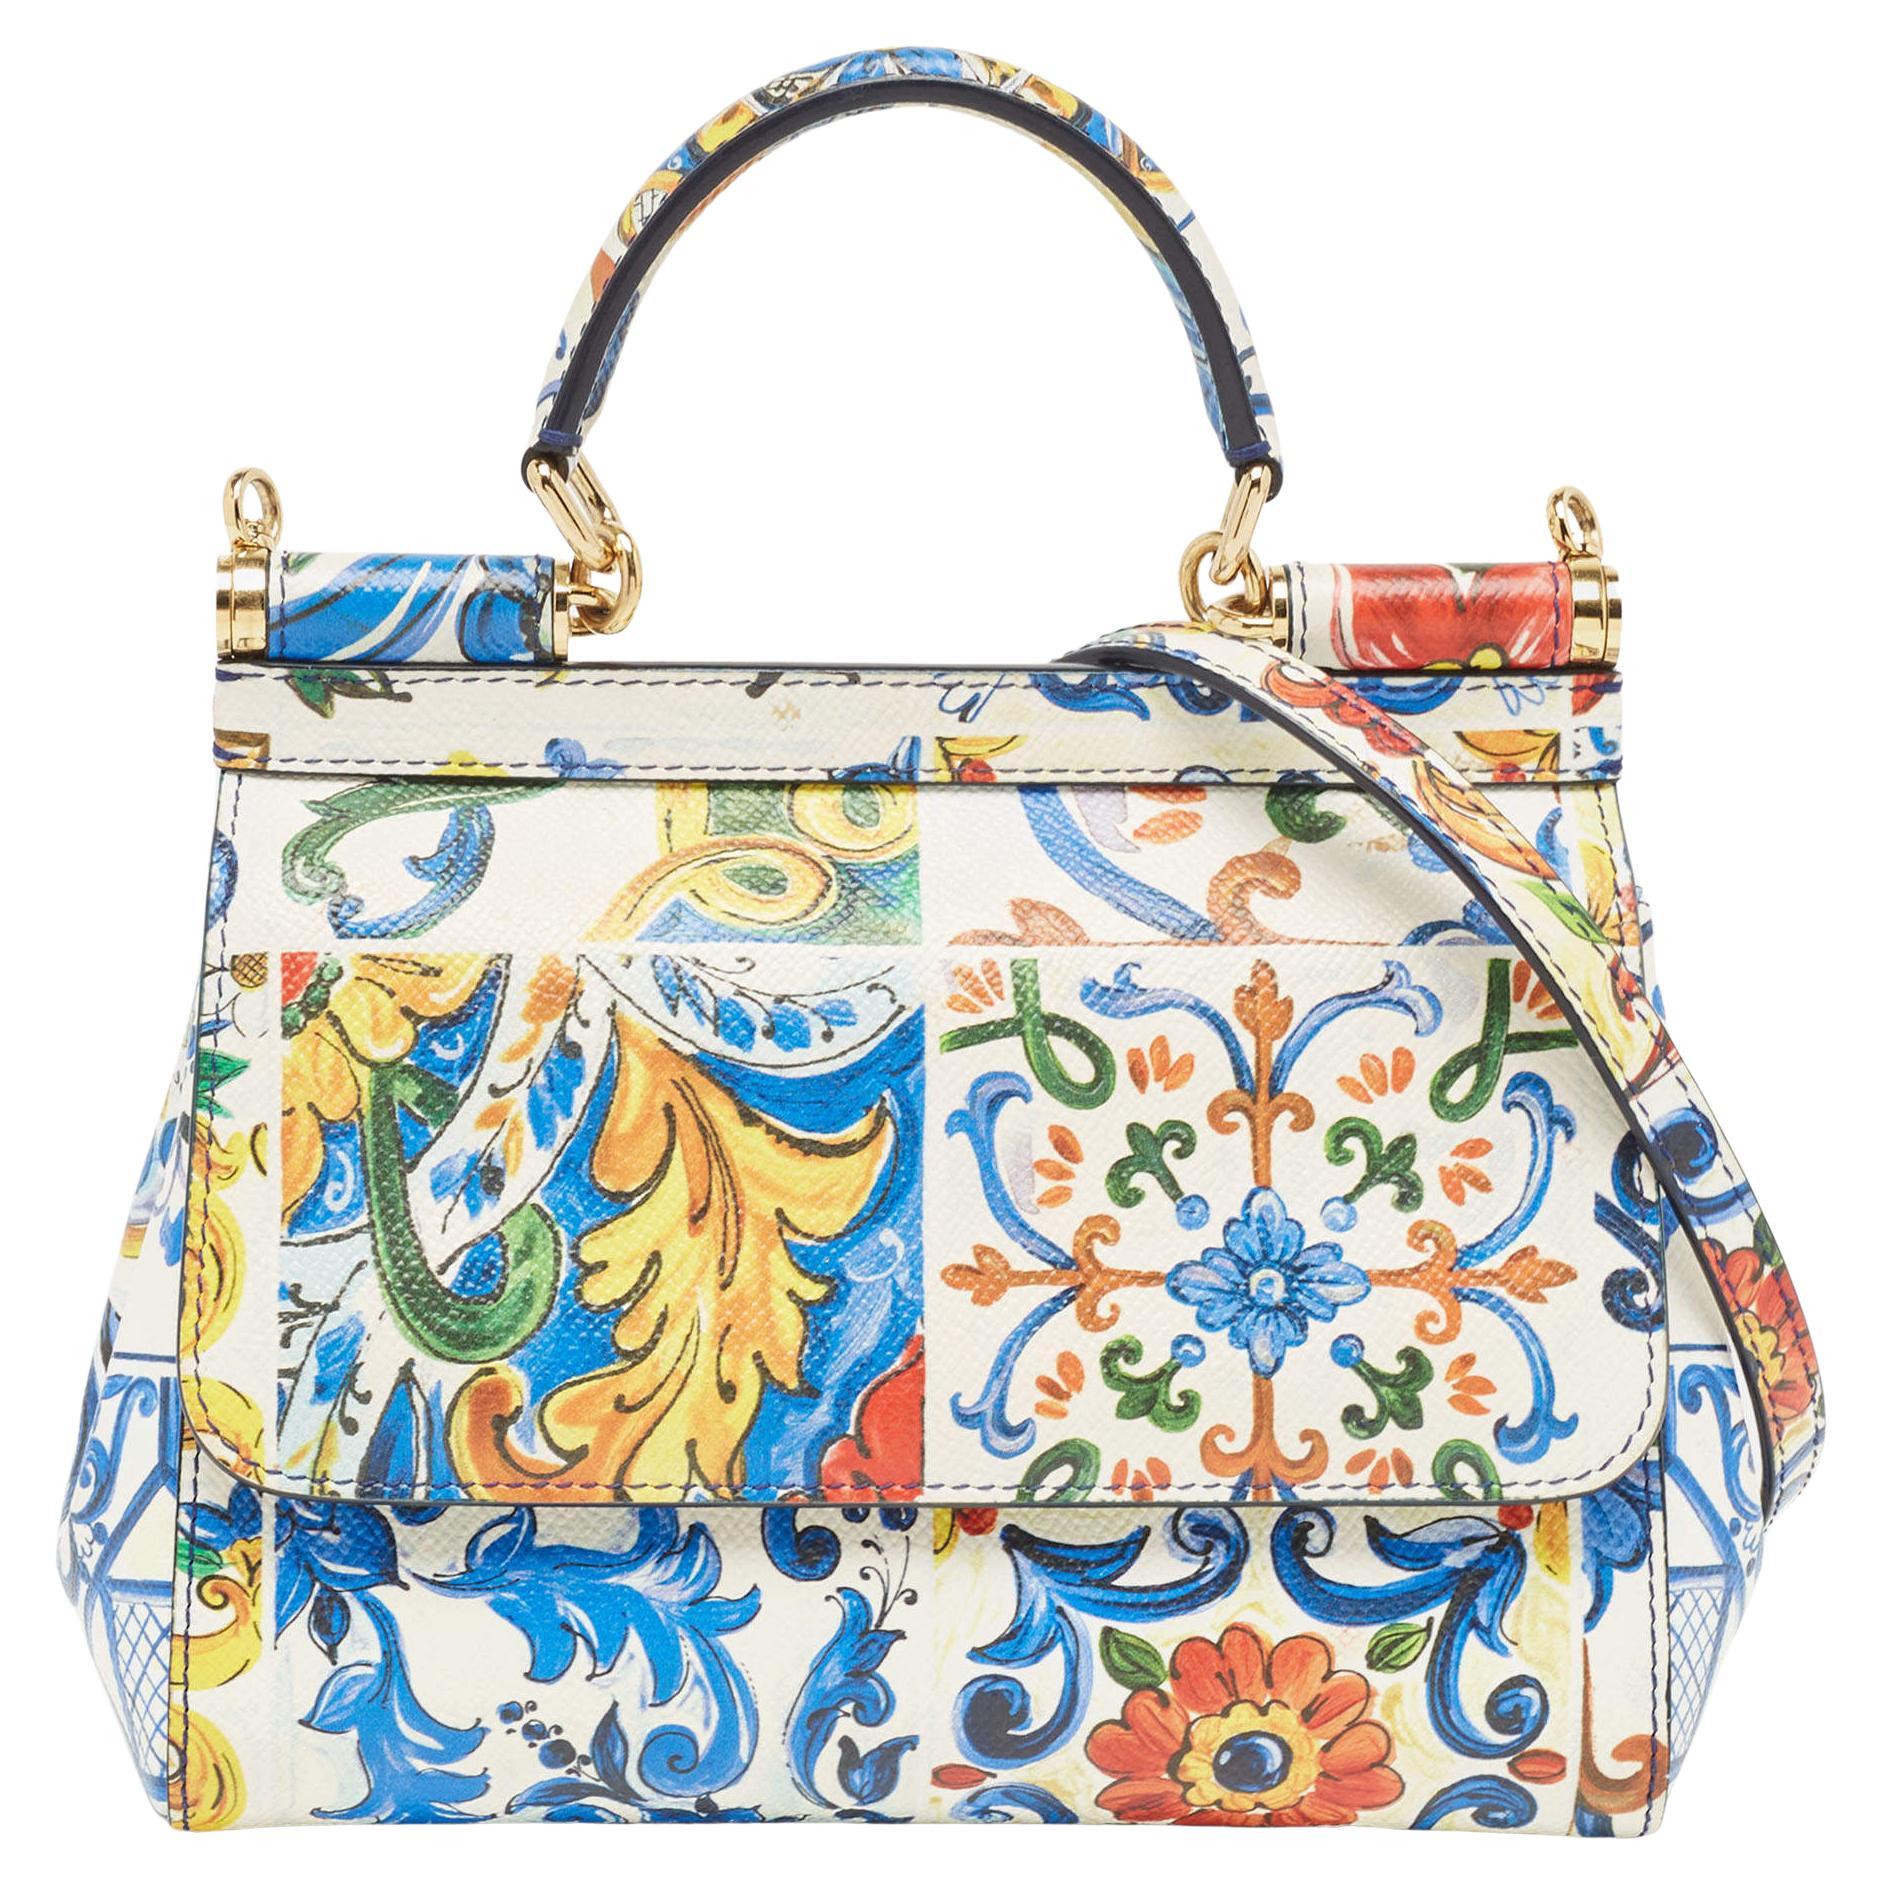 Dolce & Gabbana Multicolor Printed Leather Small Miss Sicily Top Handle Bag